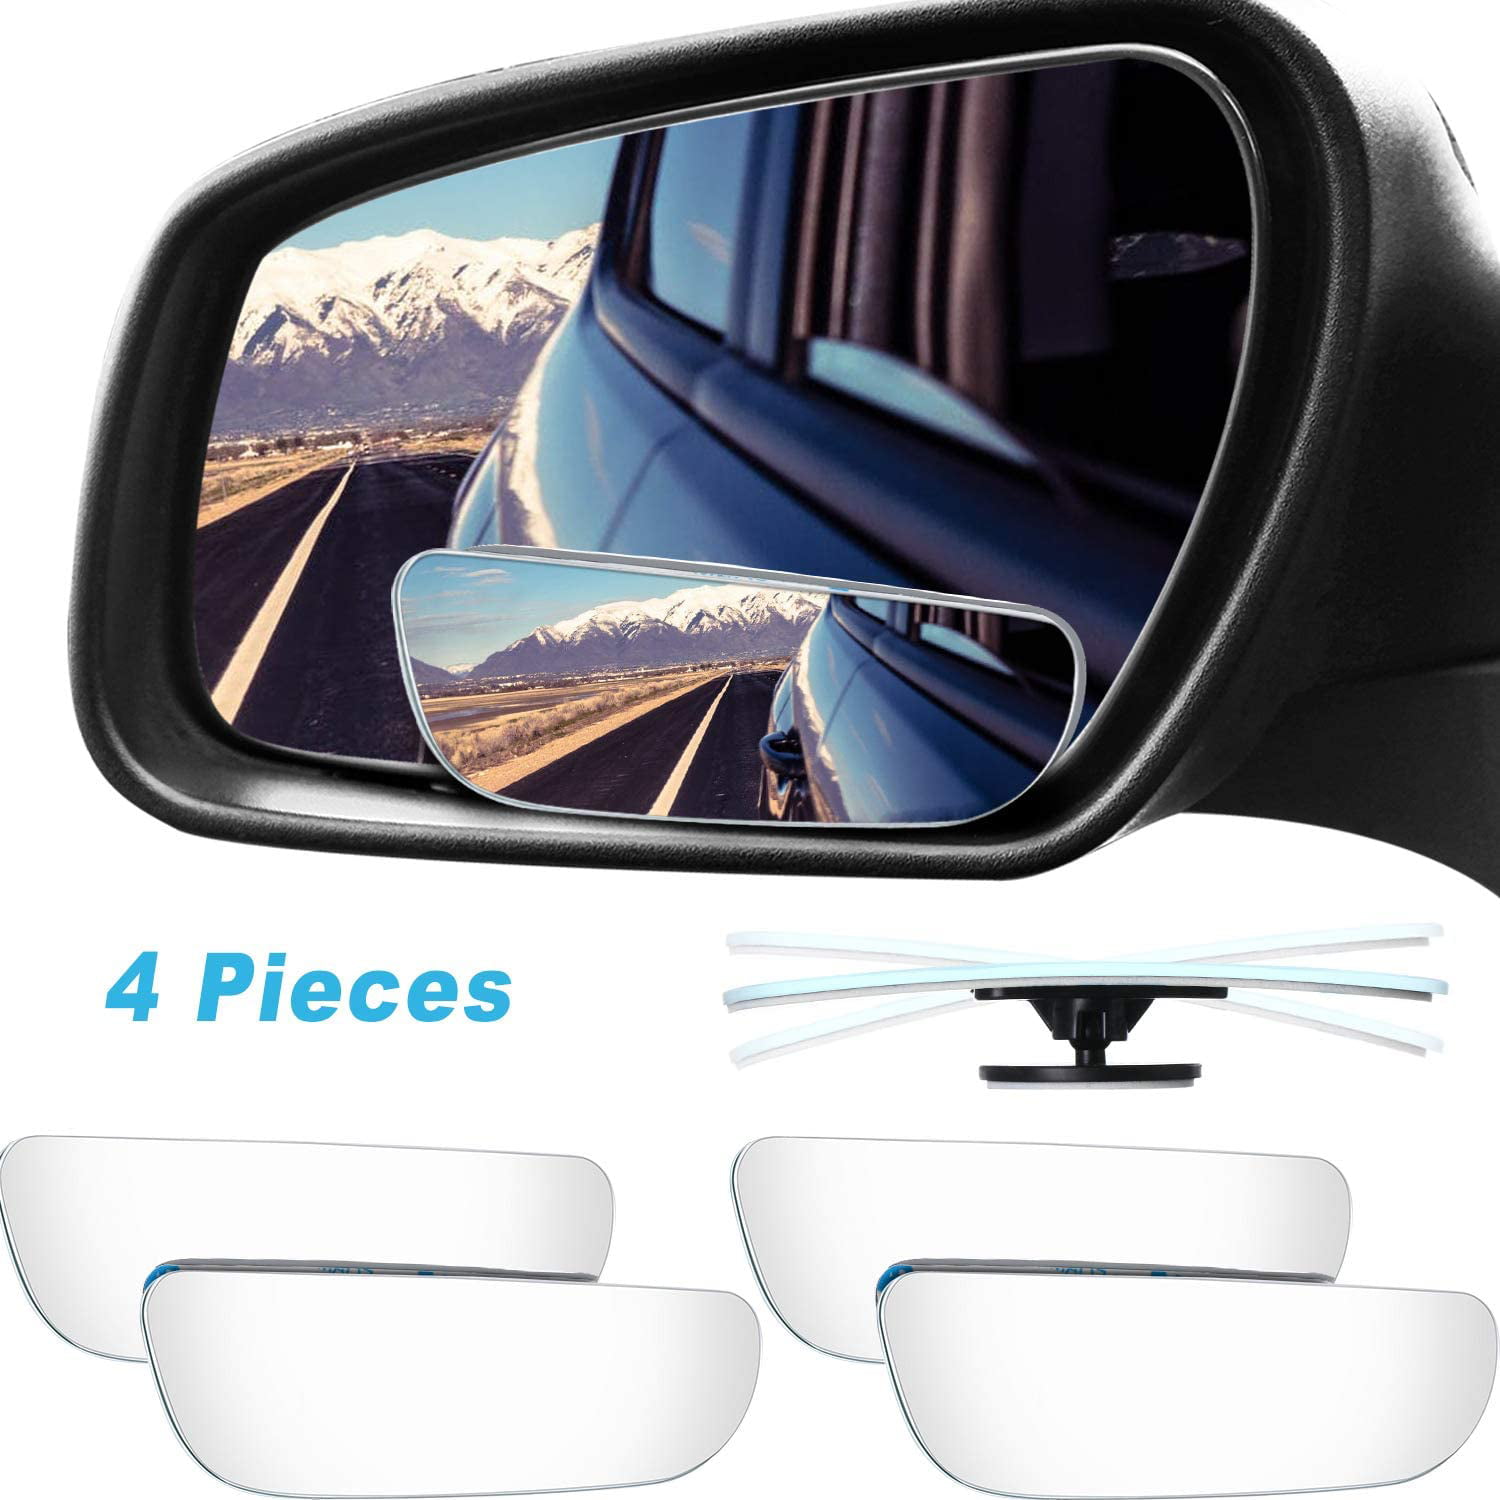 4 Pieces Blind Spot Mirror Wide Car Angle Mirror Round HD Glass Safety Convex Rear View Mirror 360 Degree Rotating Auto Side Mirror Adjustable Waterproof Round Mirror with 4 Base for Car Truck SUV 